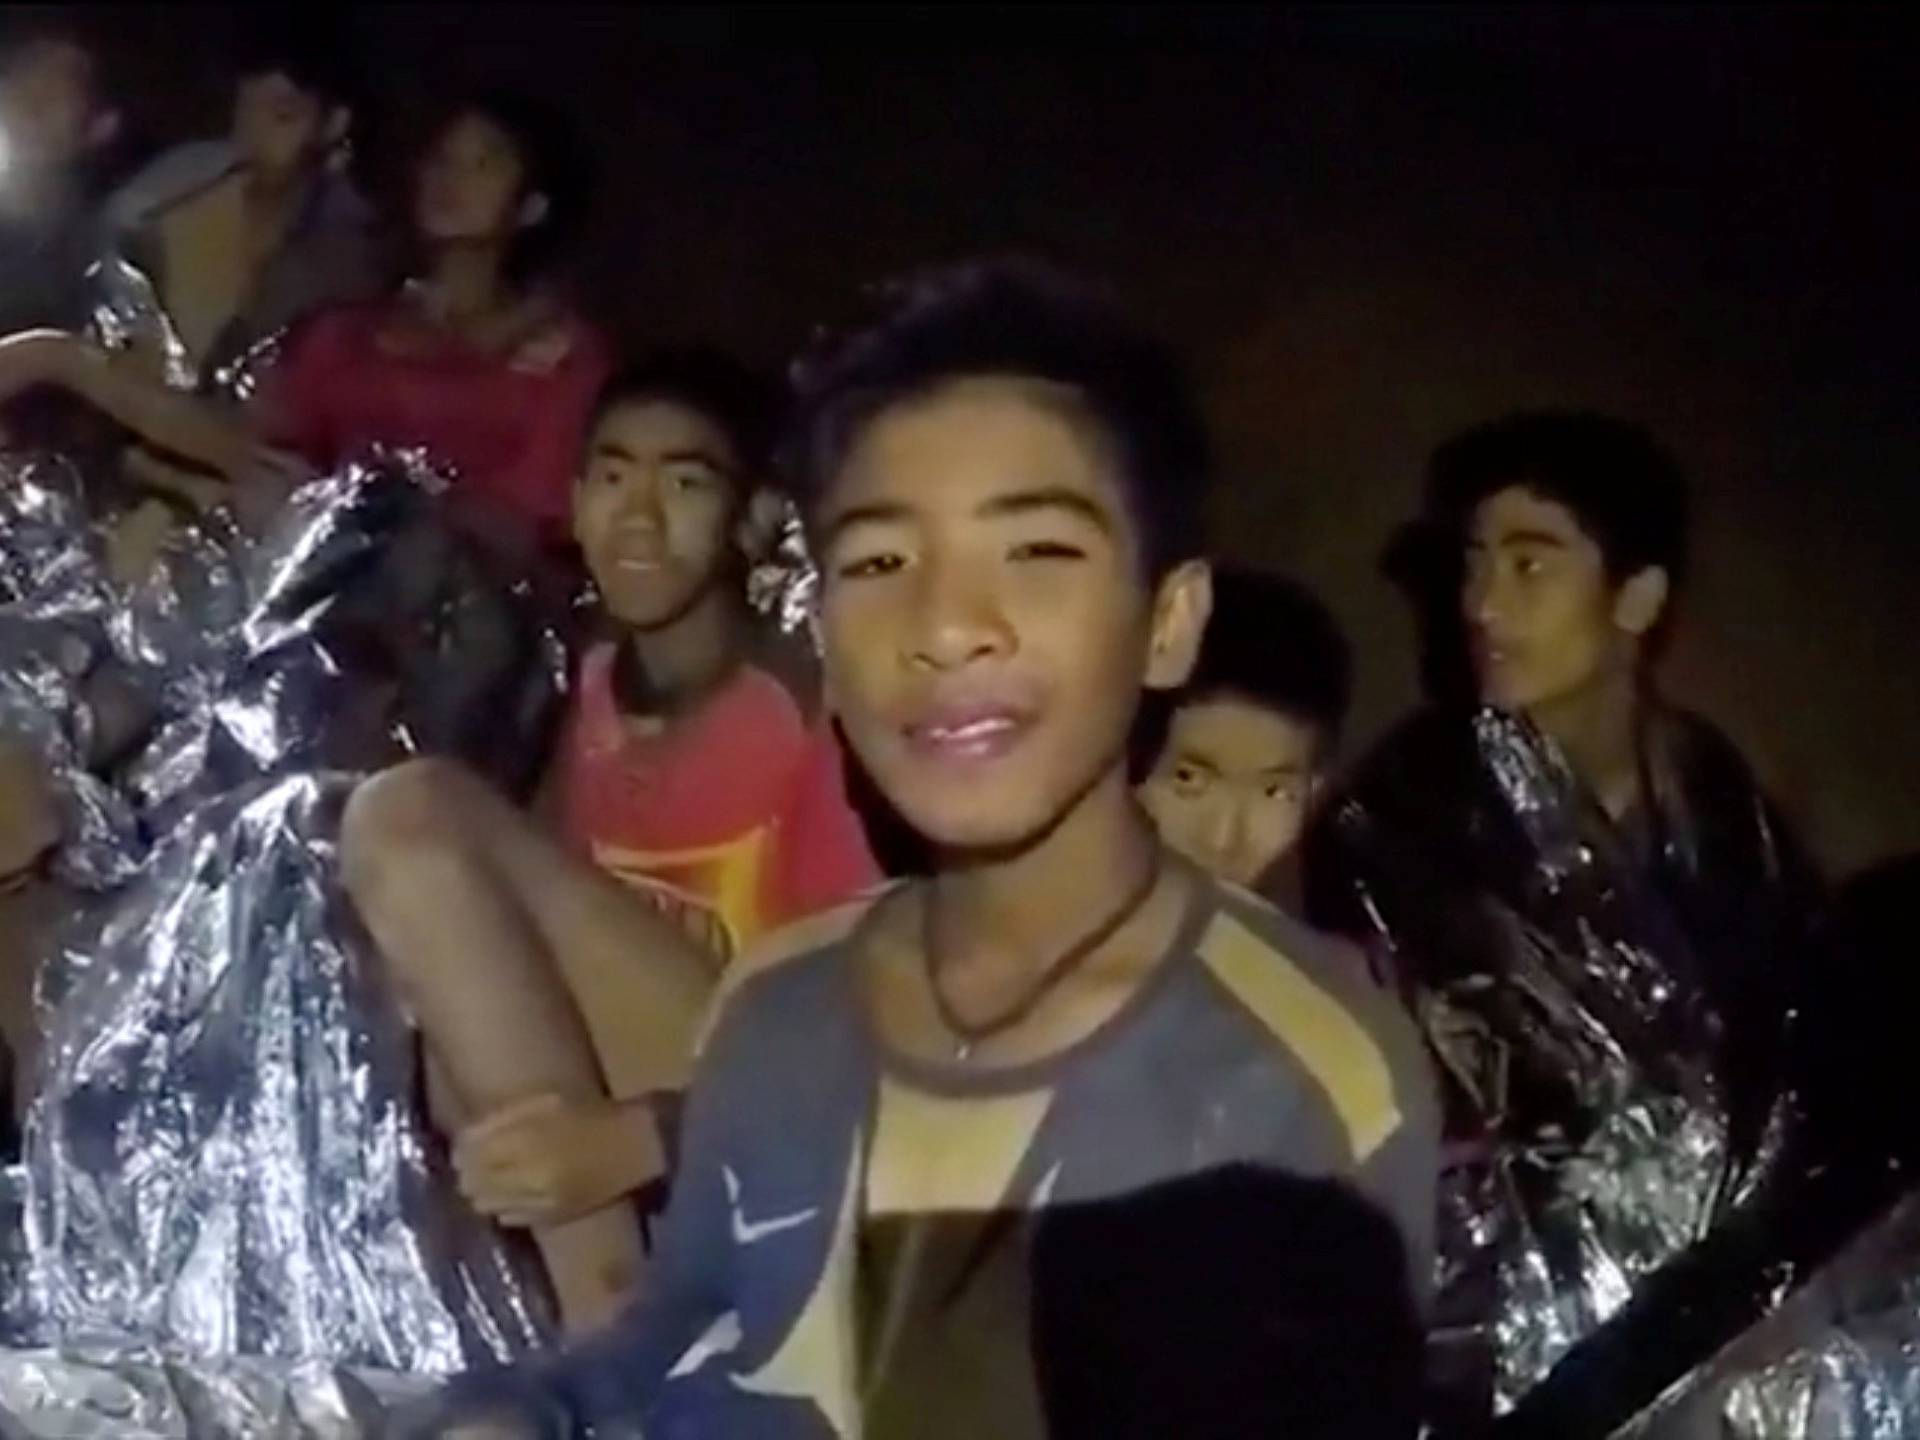 Boys from the under-16 soccer team trapped inside Tham Luang cave covered in hypothermia blankets react to the camera in Chiang Rai, Thailand